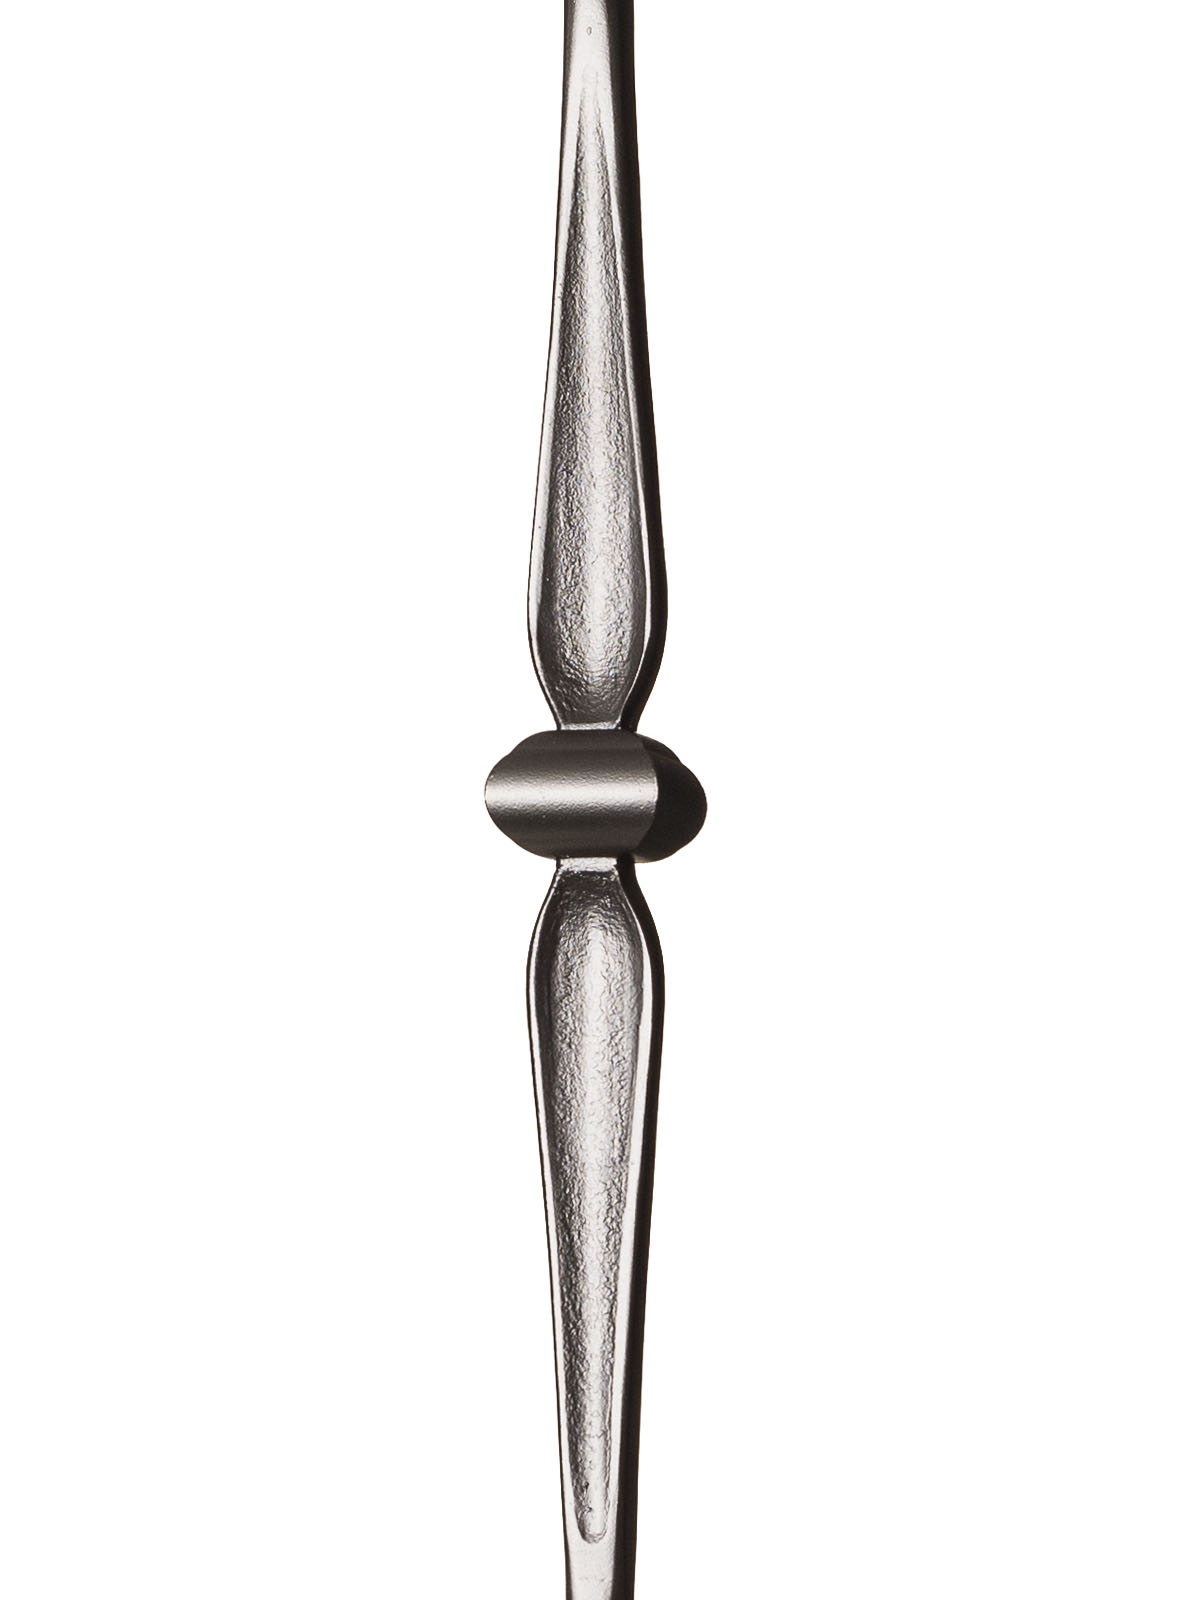 Iron Baluster 9069 - 9/16" Round - Knuckle Spoon